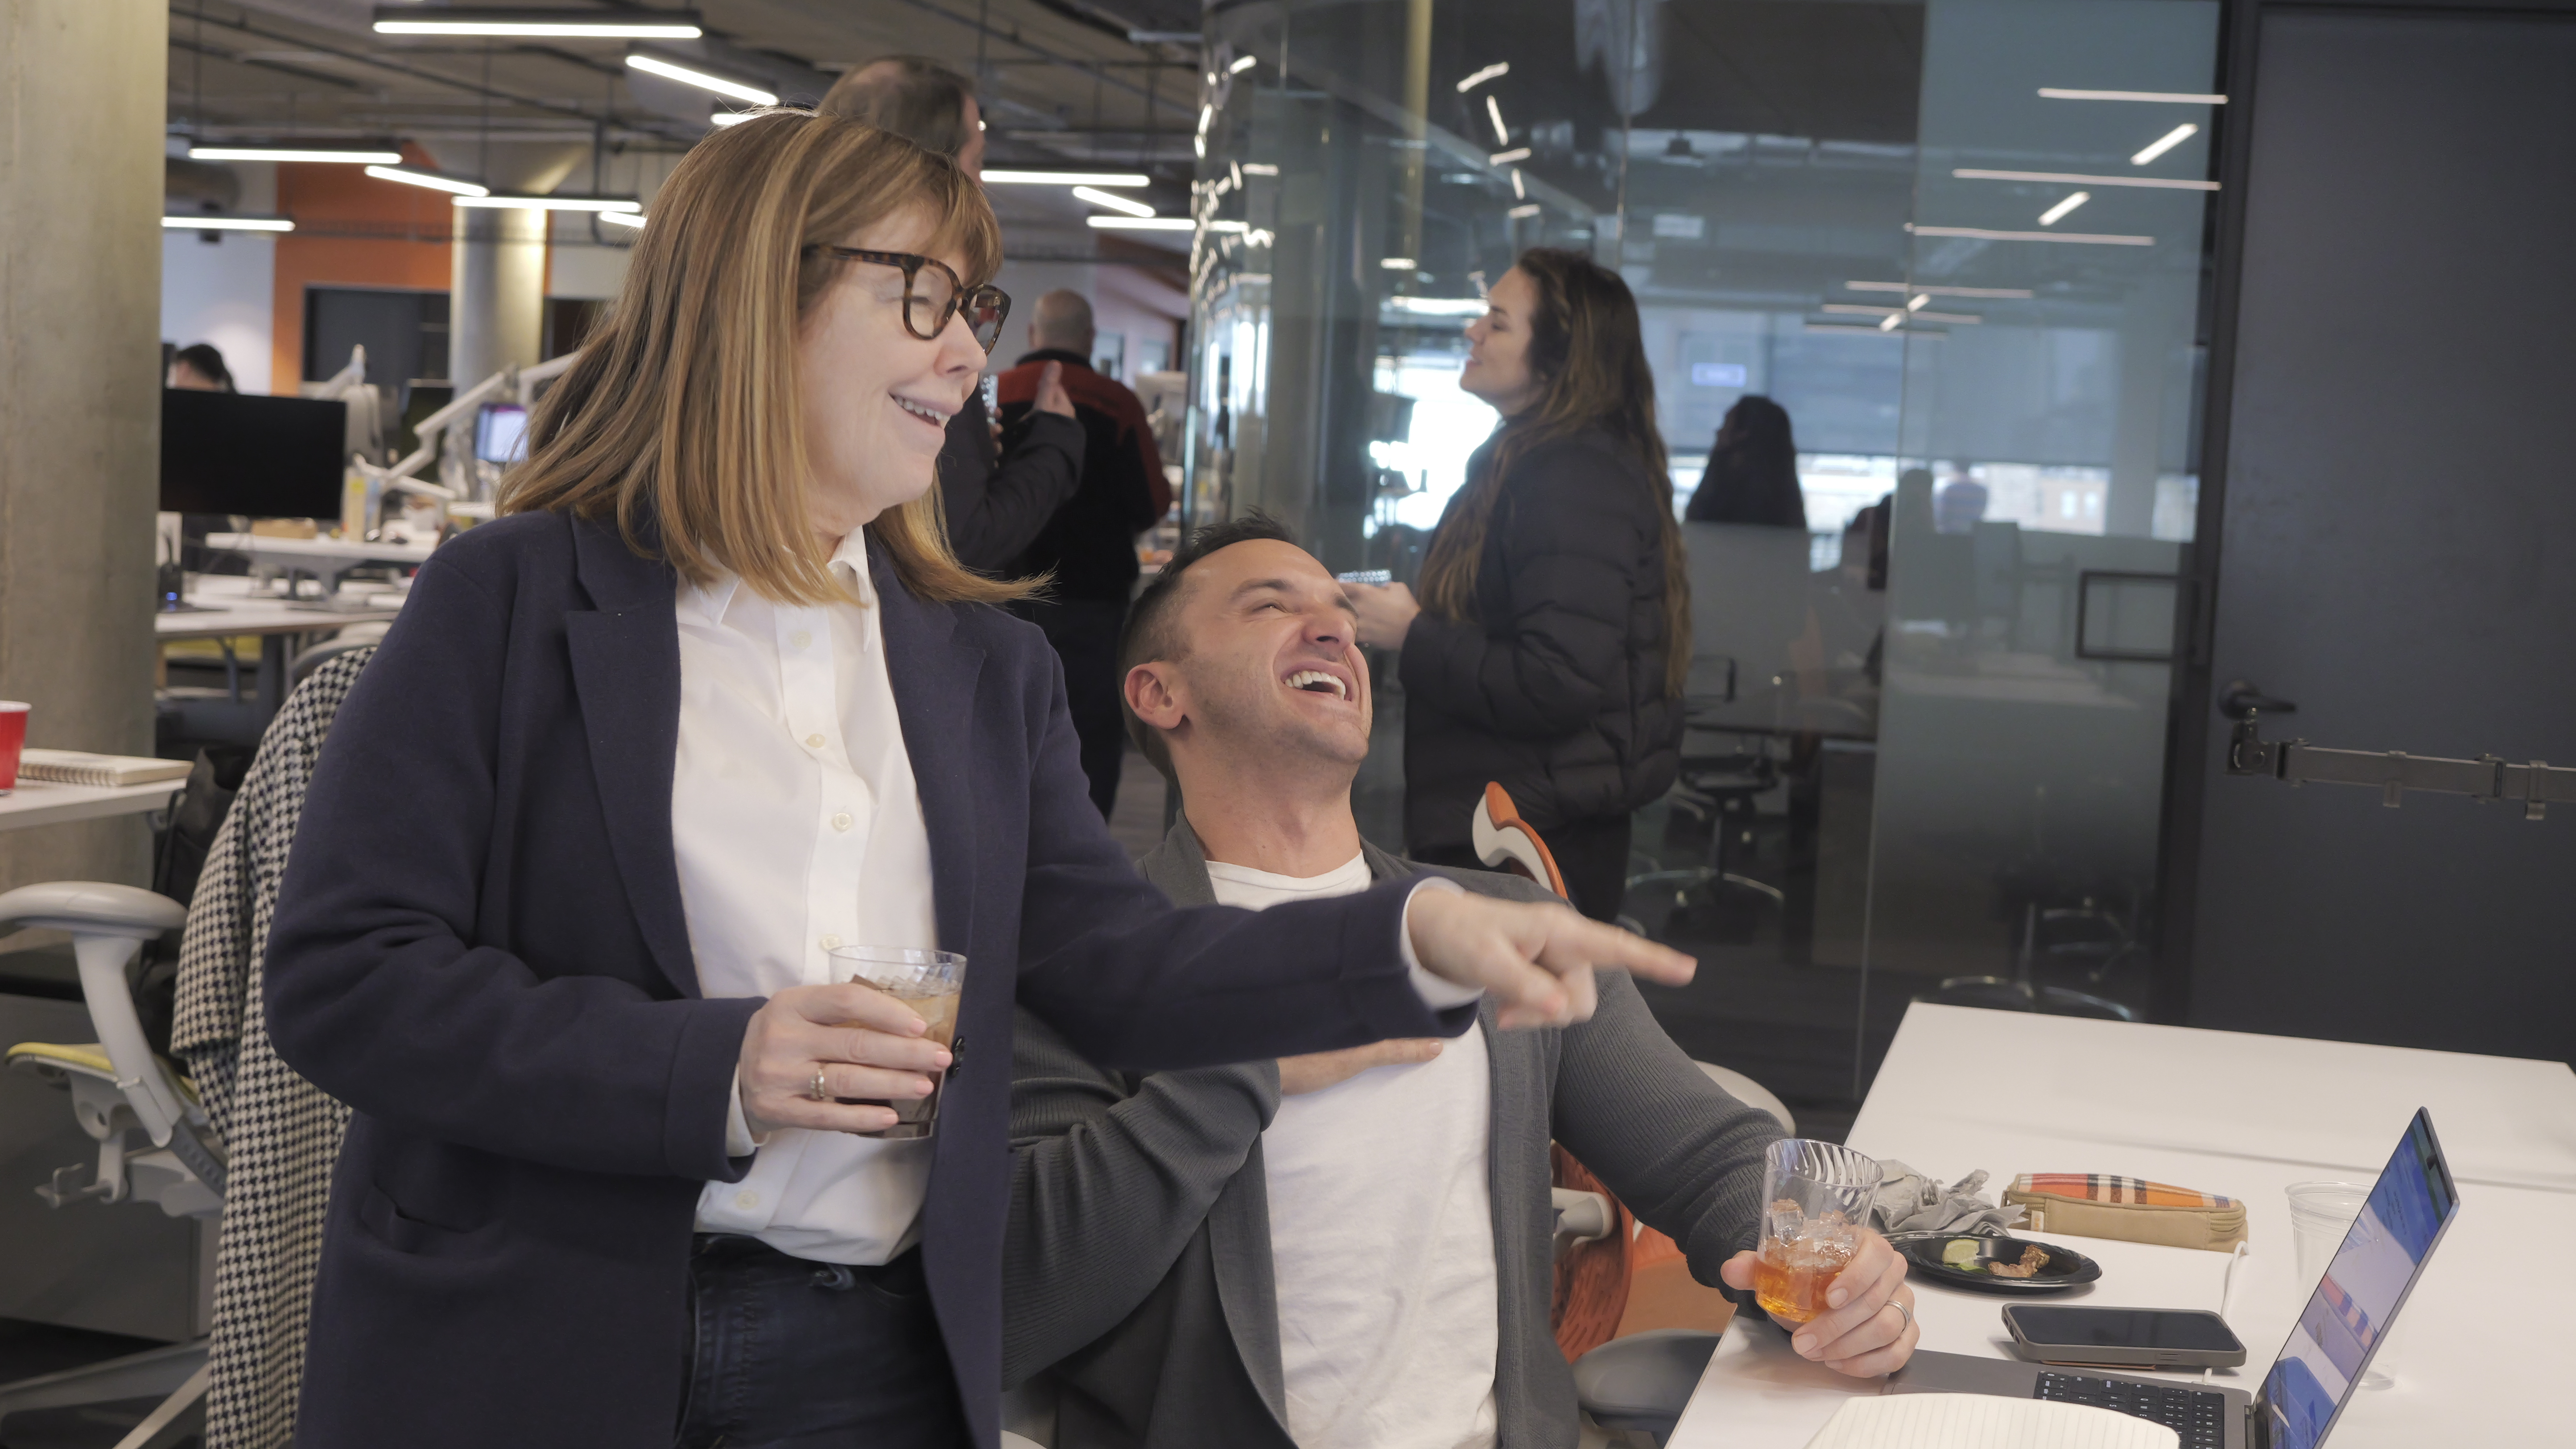 Woman pointing at screen making a joke, her colleague laughing